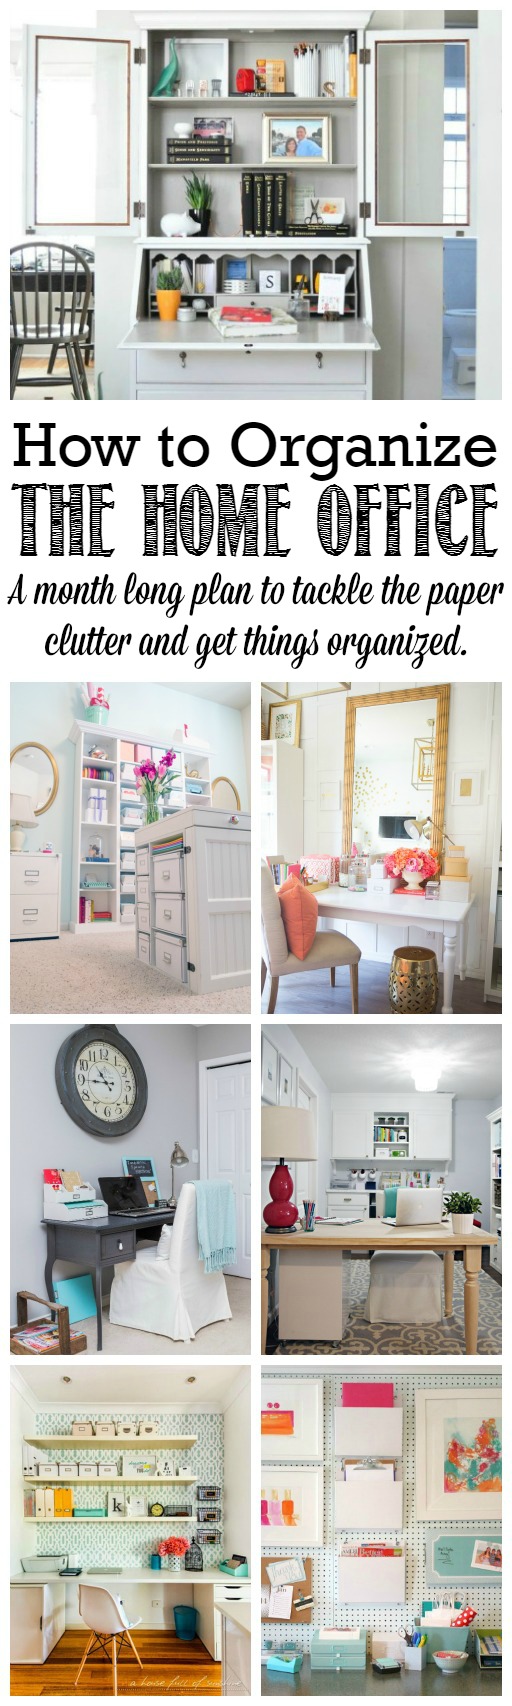 https://www.cleanandscentsible.com/wp-content/uploads/2015/03/How-to-Organize-the-Office.jpg